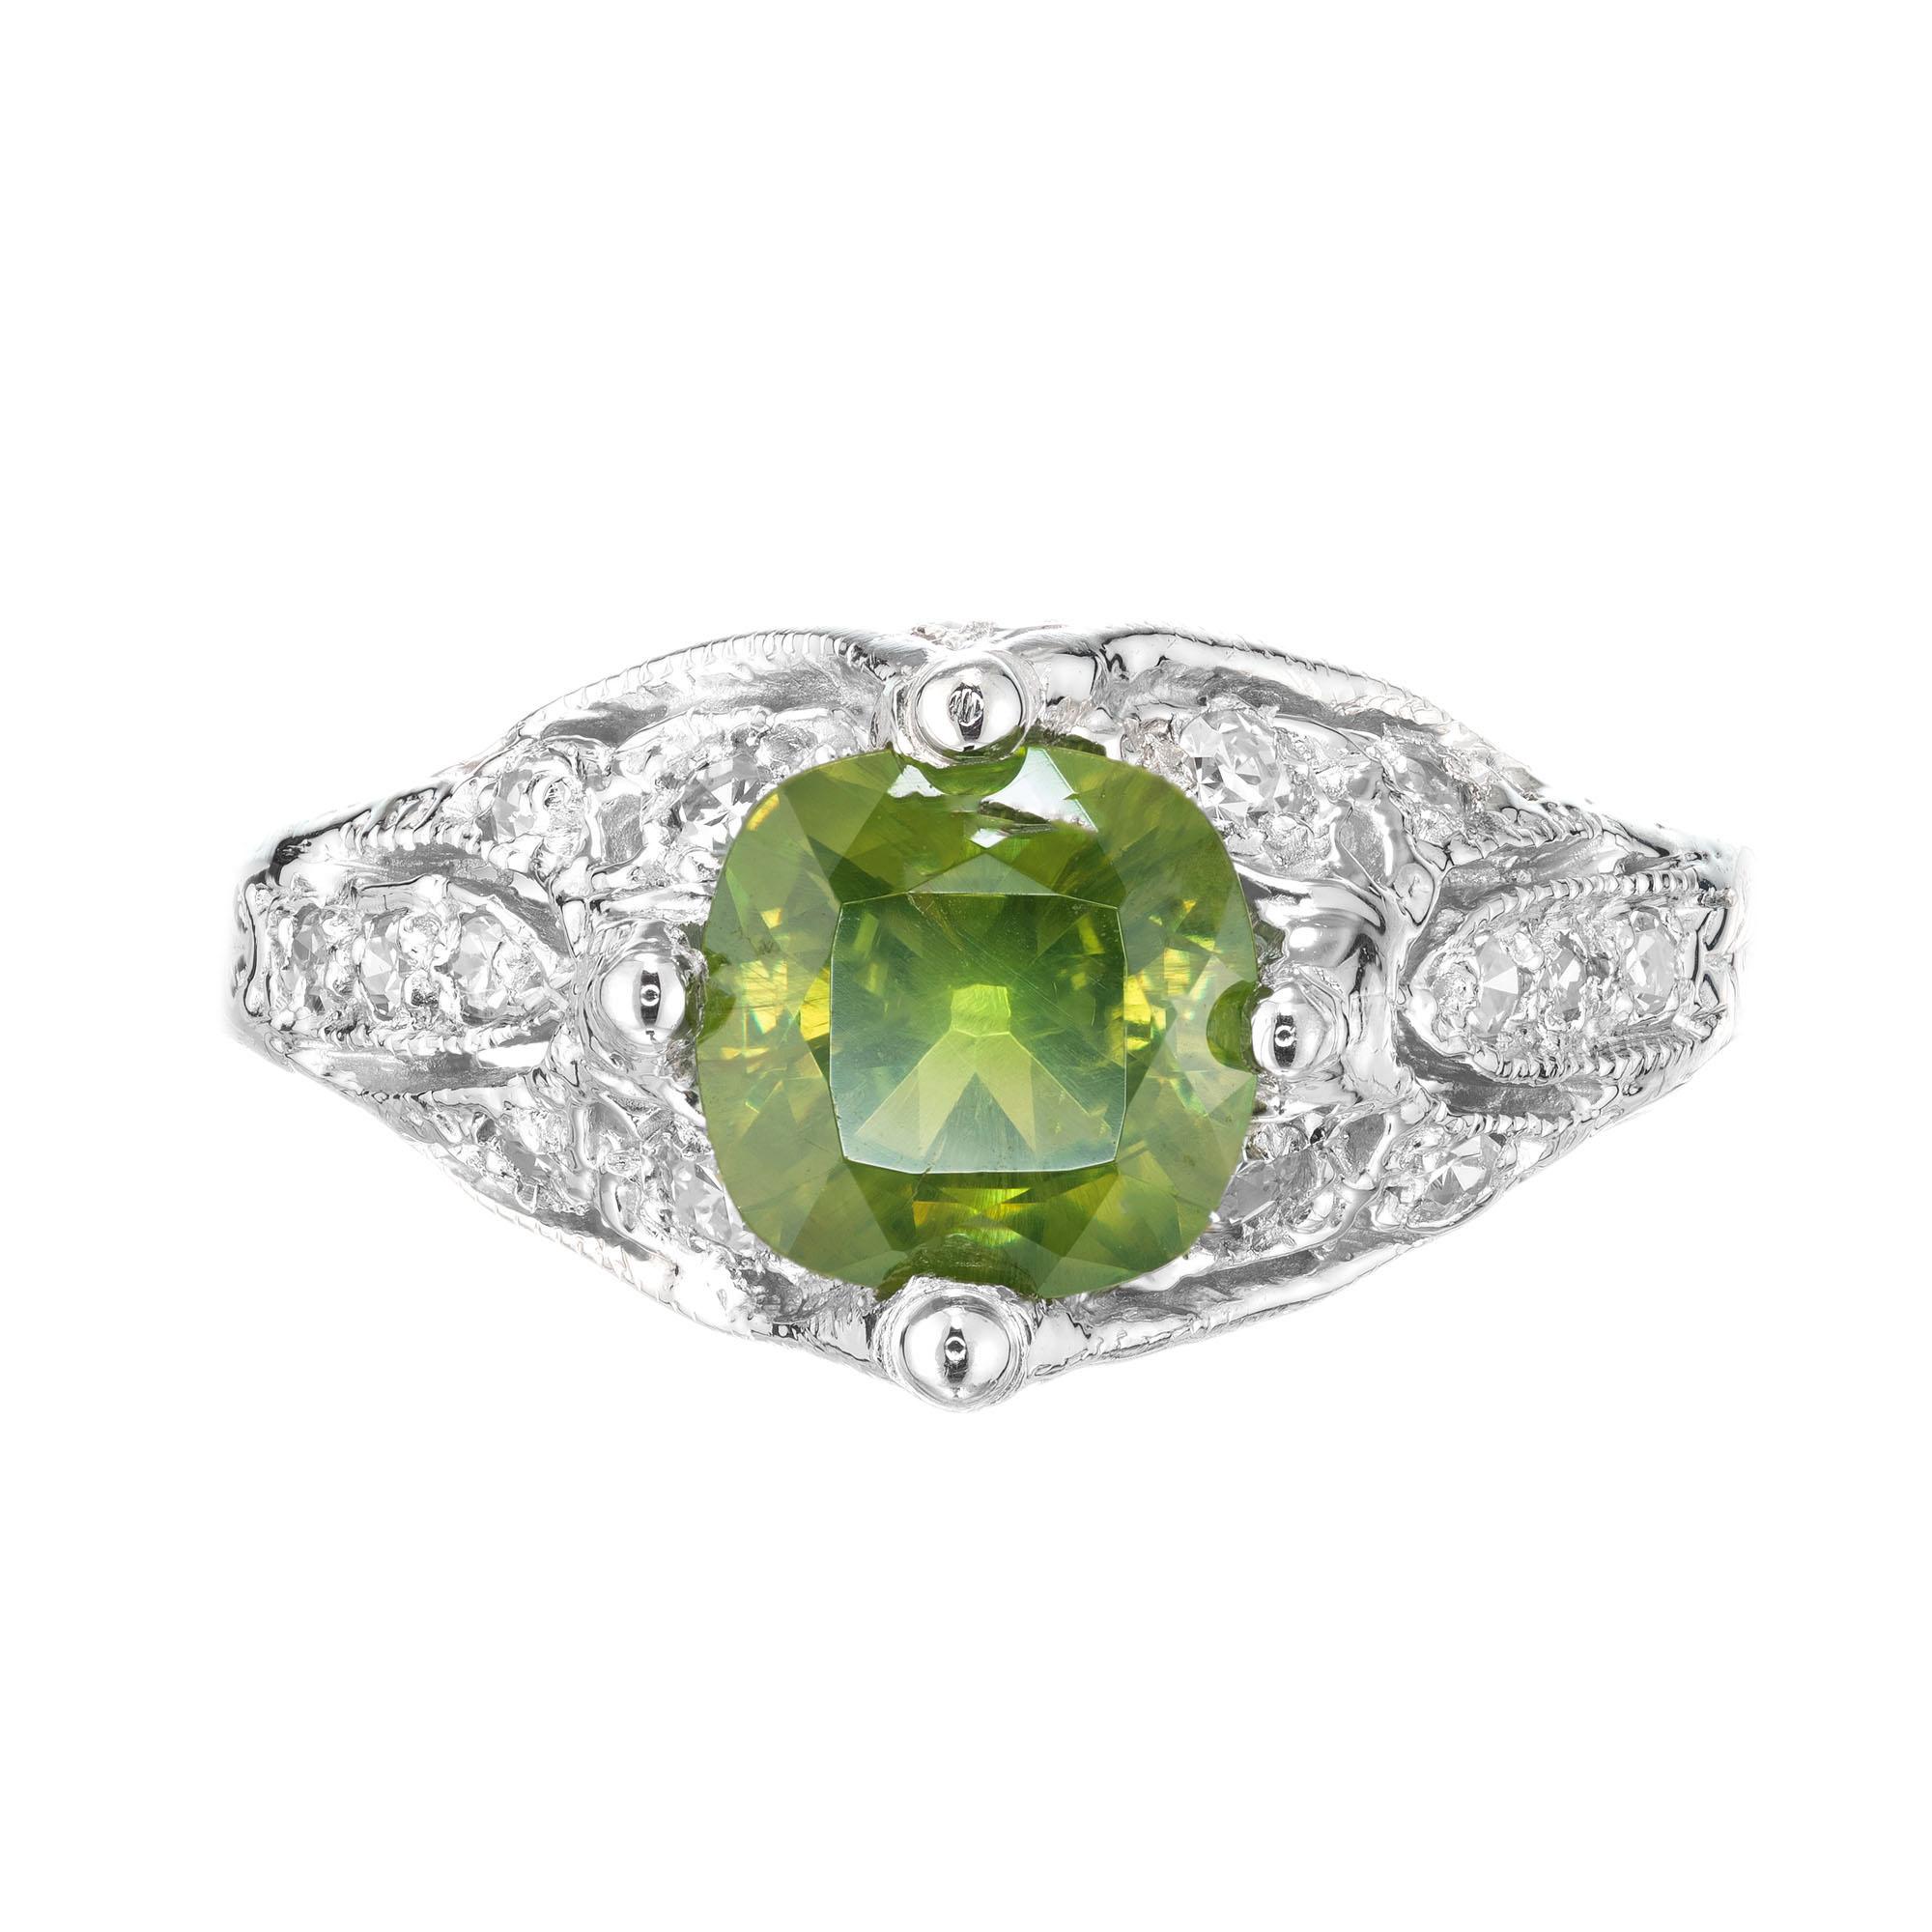 1920-1930 Art Deco demantoid garnet engagment ring. Antique cushion cut GIA center stone set in platinum with 16 round accent diamonds. Russian origin with a horse tail inclusion.

1 antique cushion green demantoid Garnet, approx. total weight